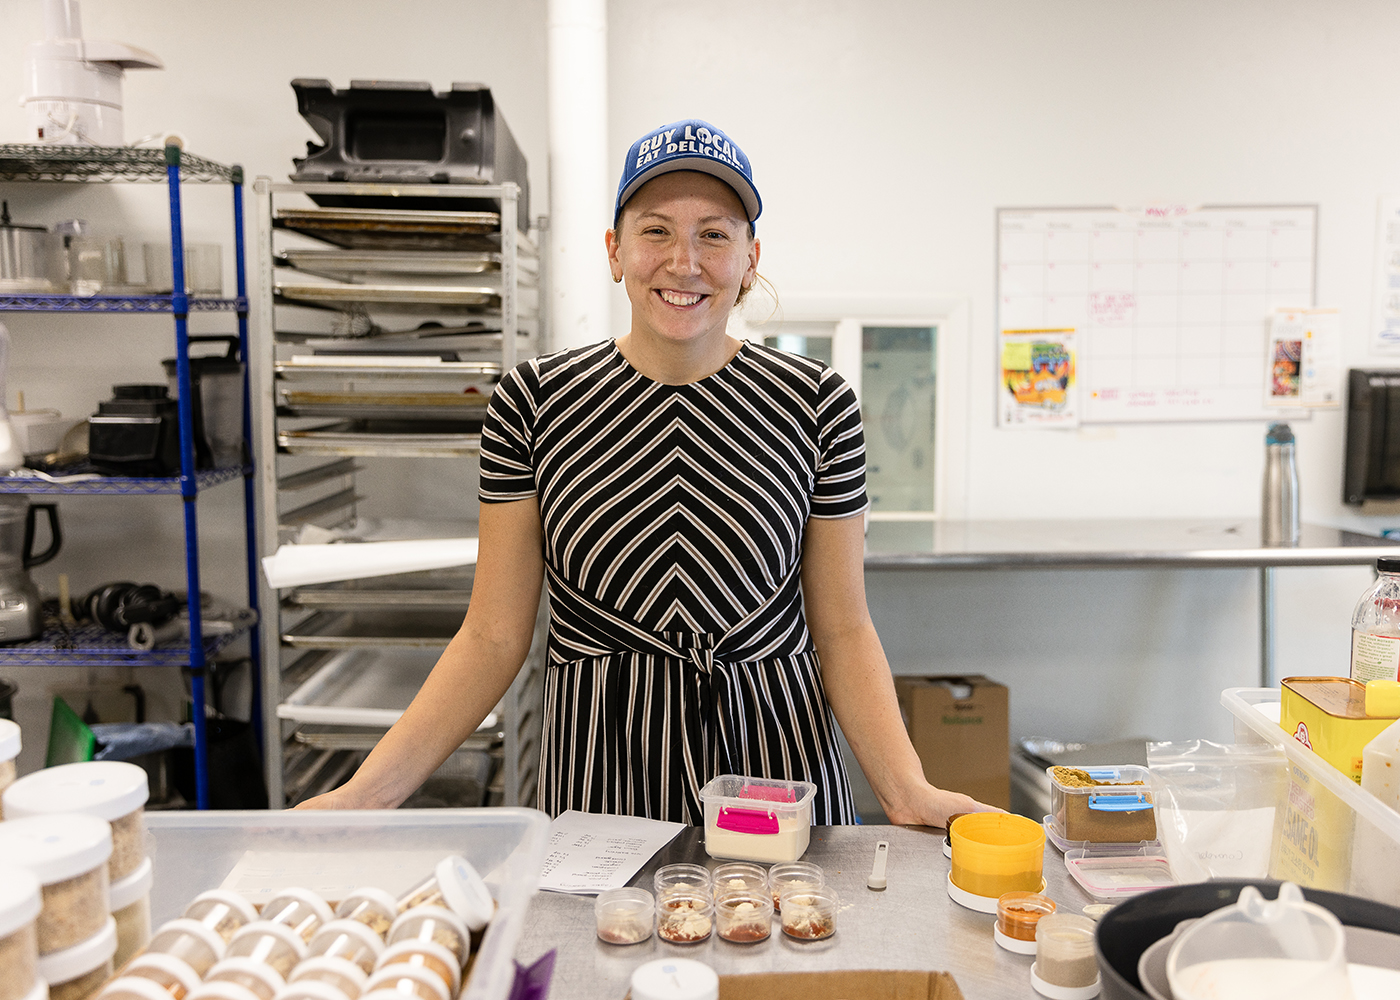 Rachel Smith prepares vegan meal kits for her monthly subscription service, SLC Chow, using local, fresh and tasty ingredients.